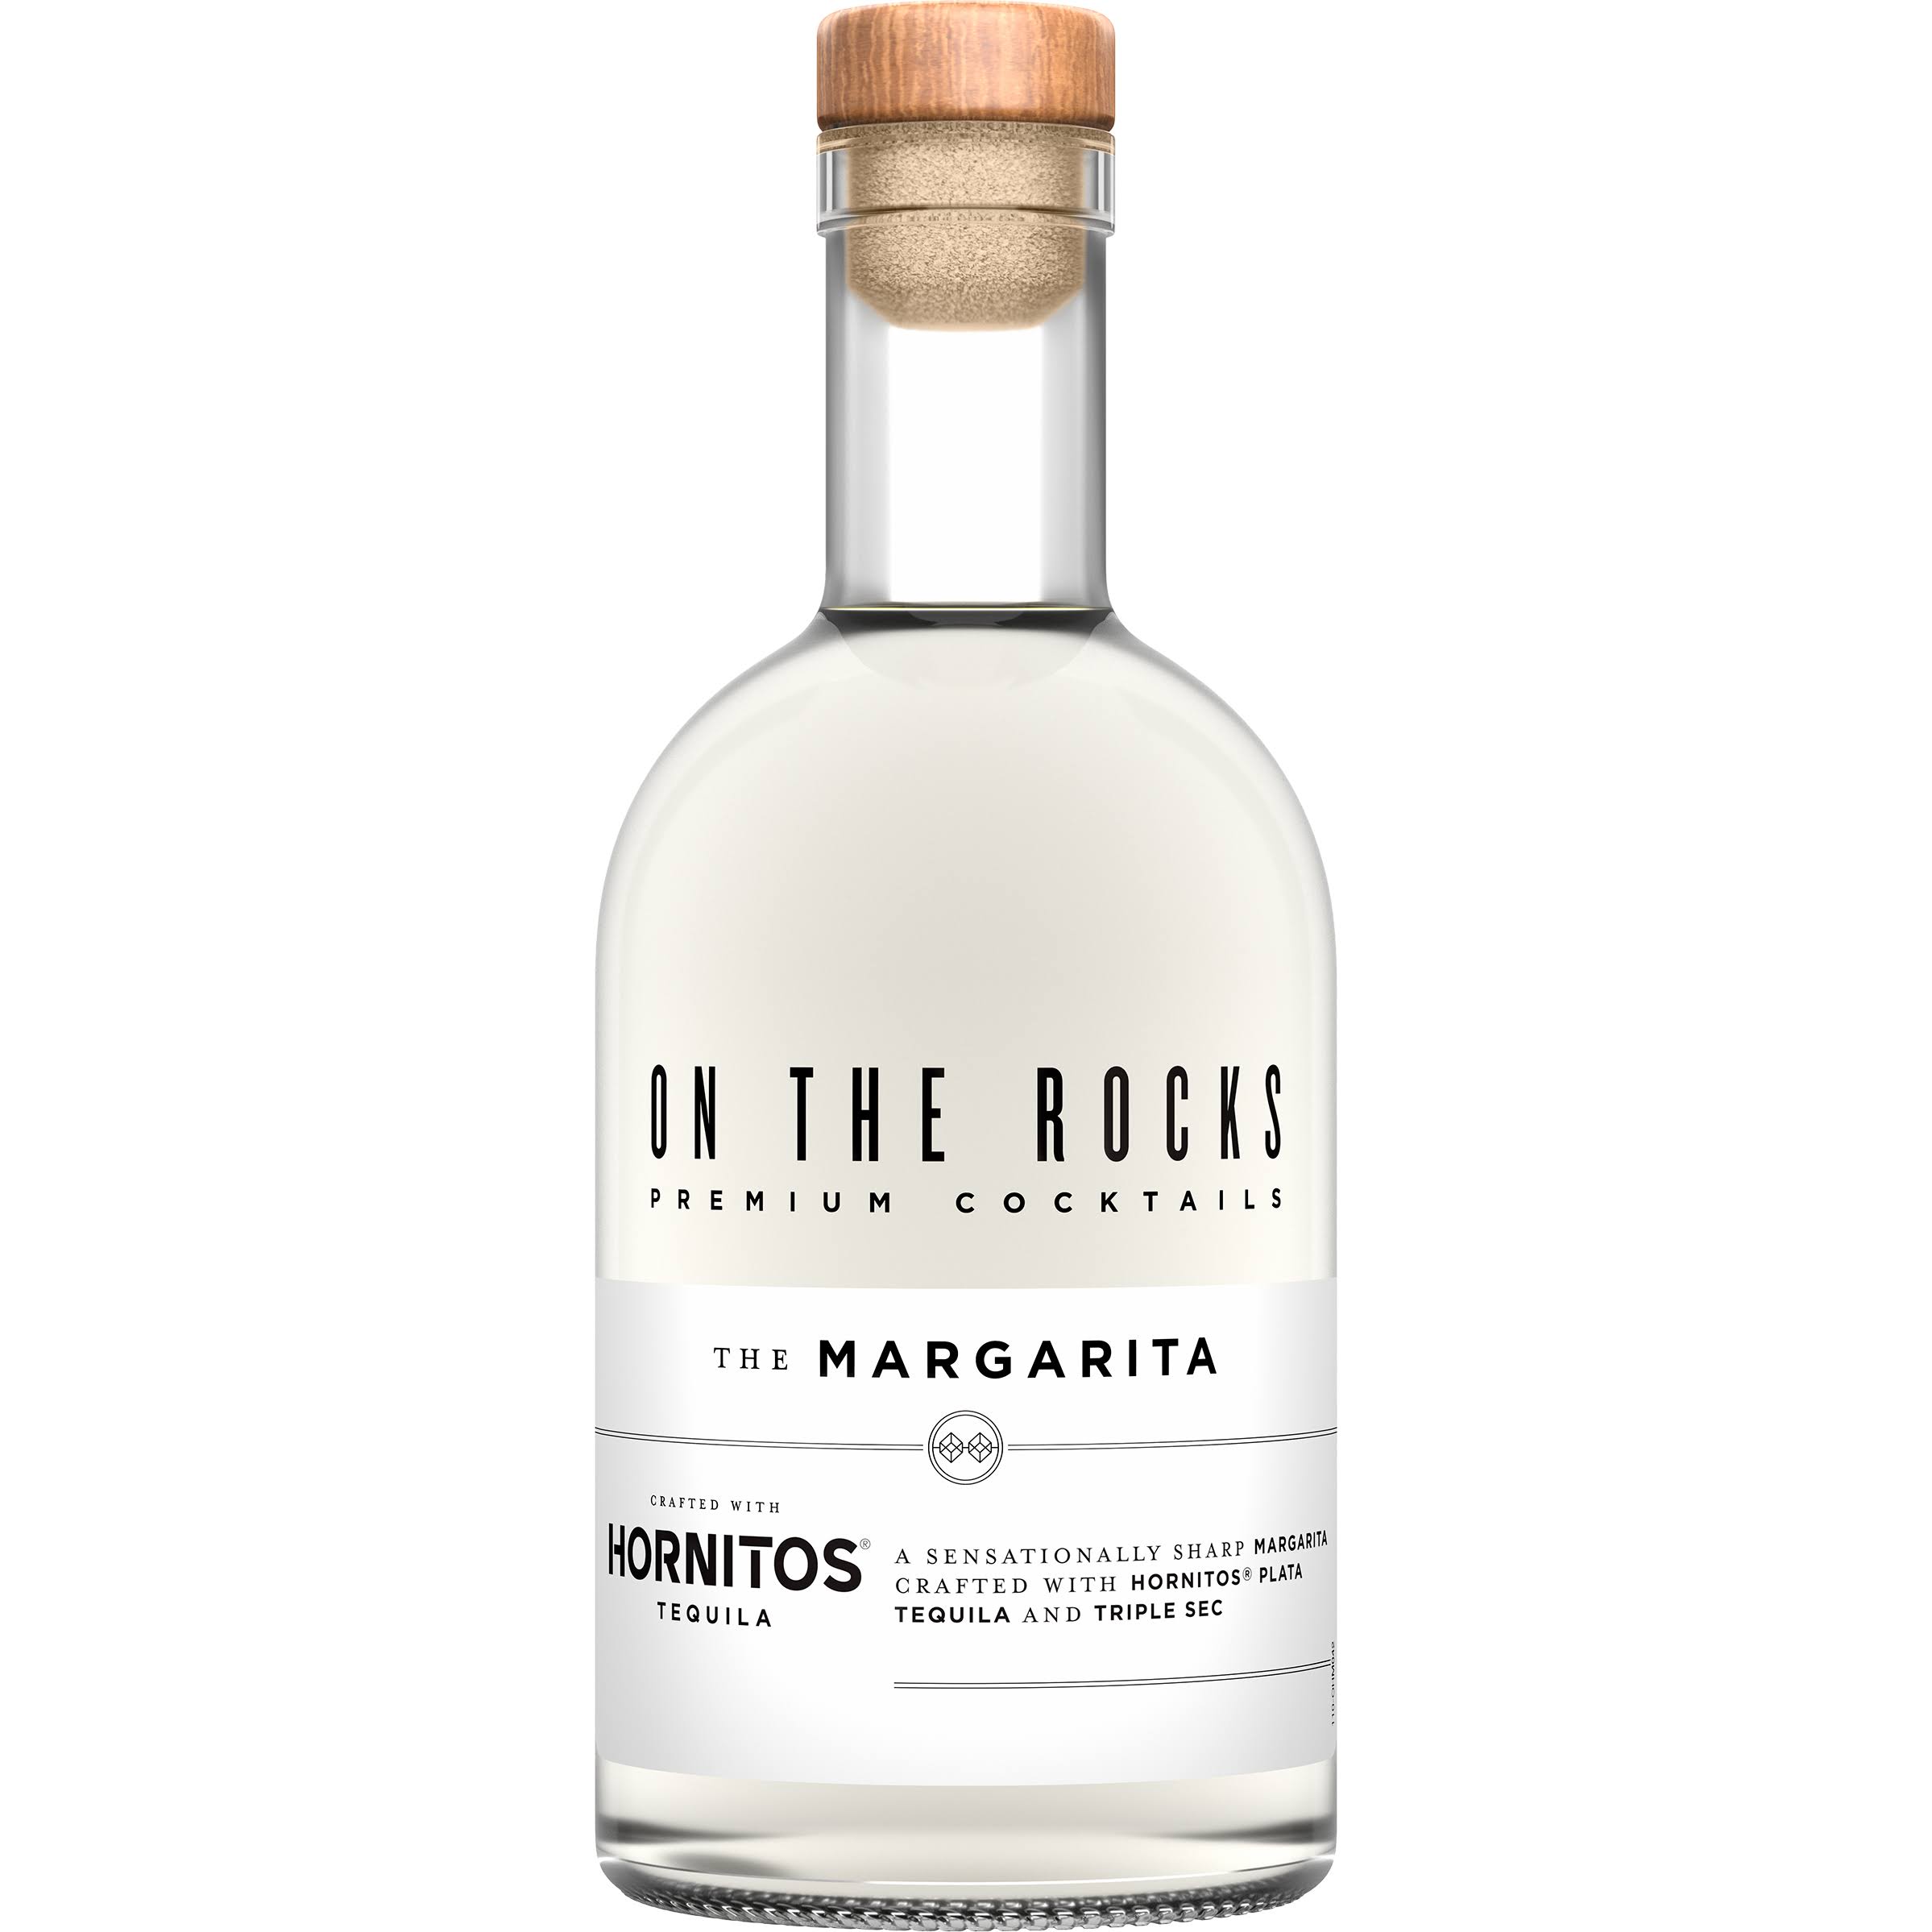 On The Rocks 'The Margarita' Cocktail United States / 375ML